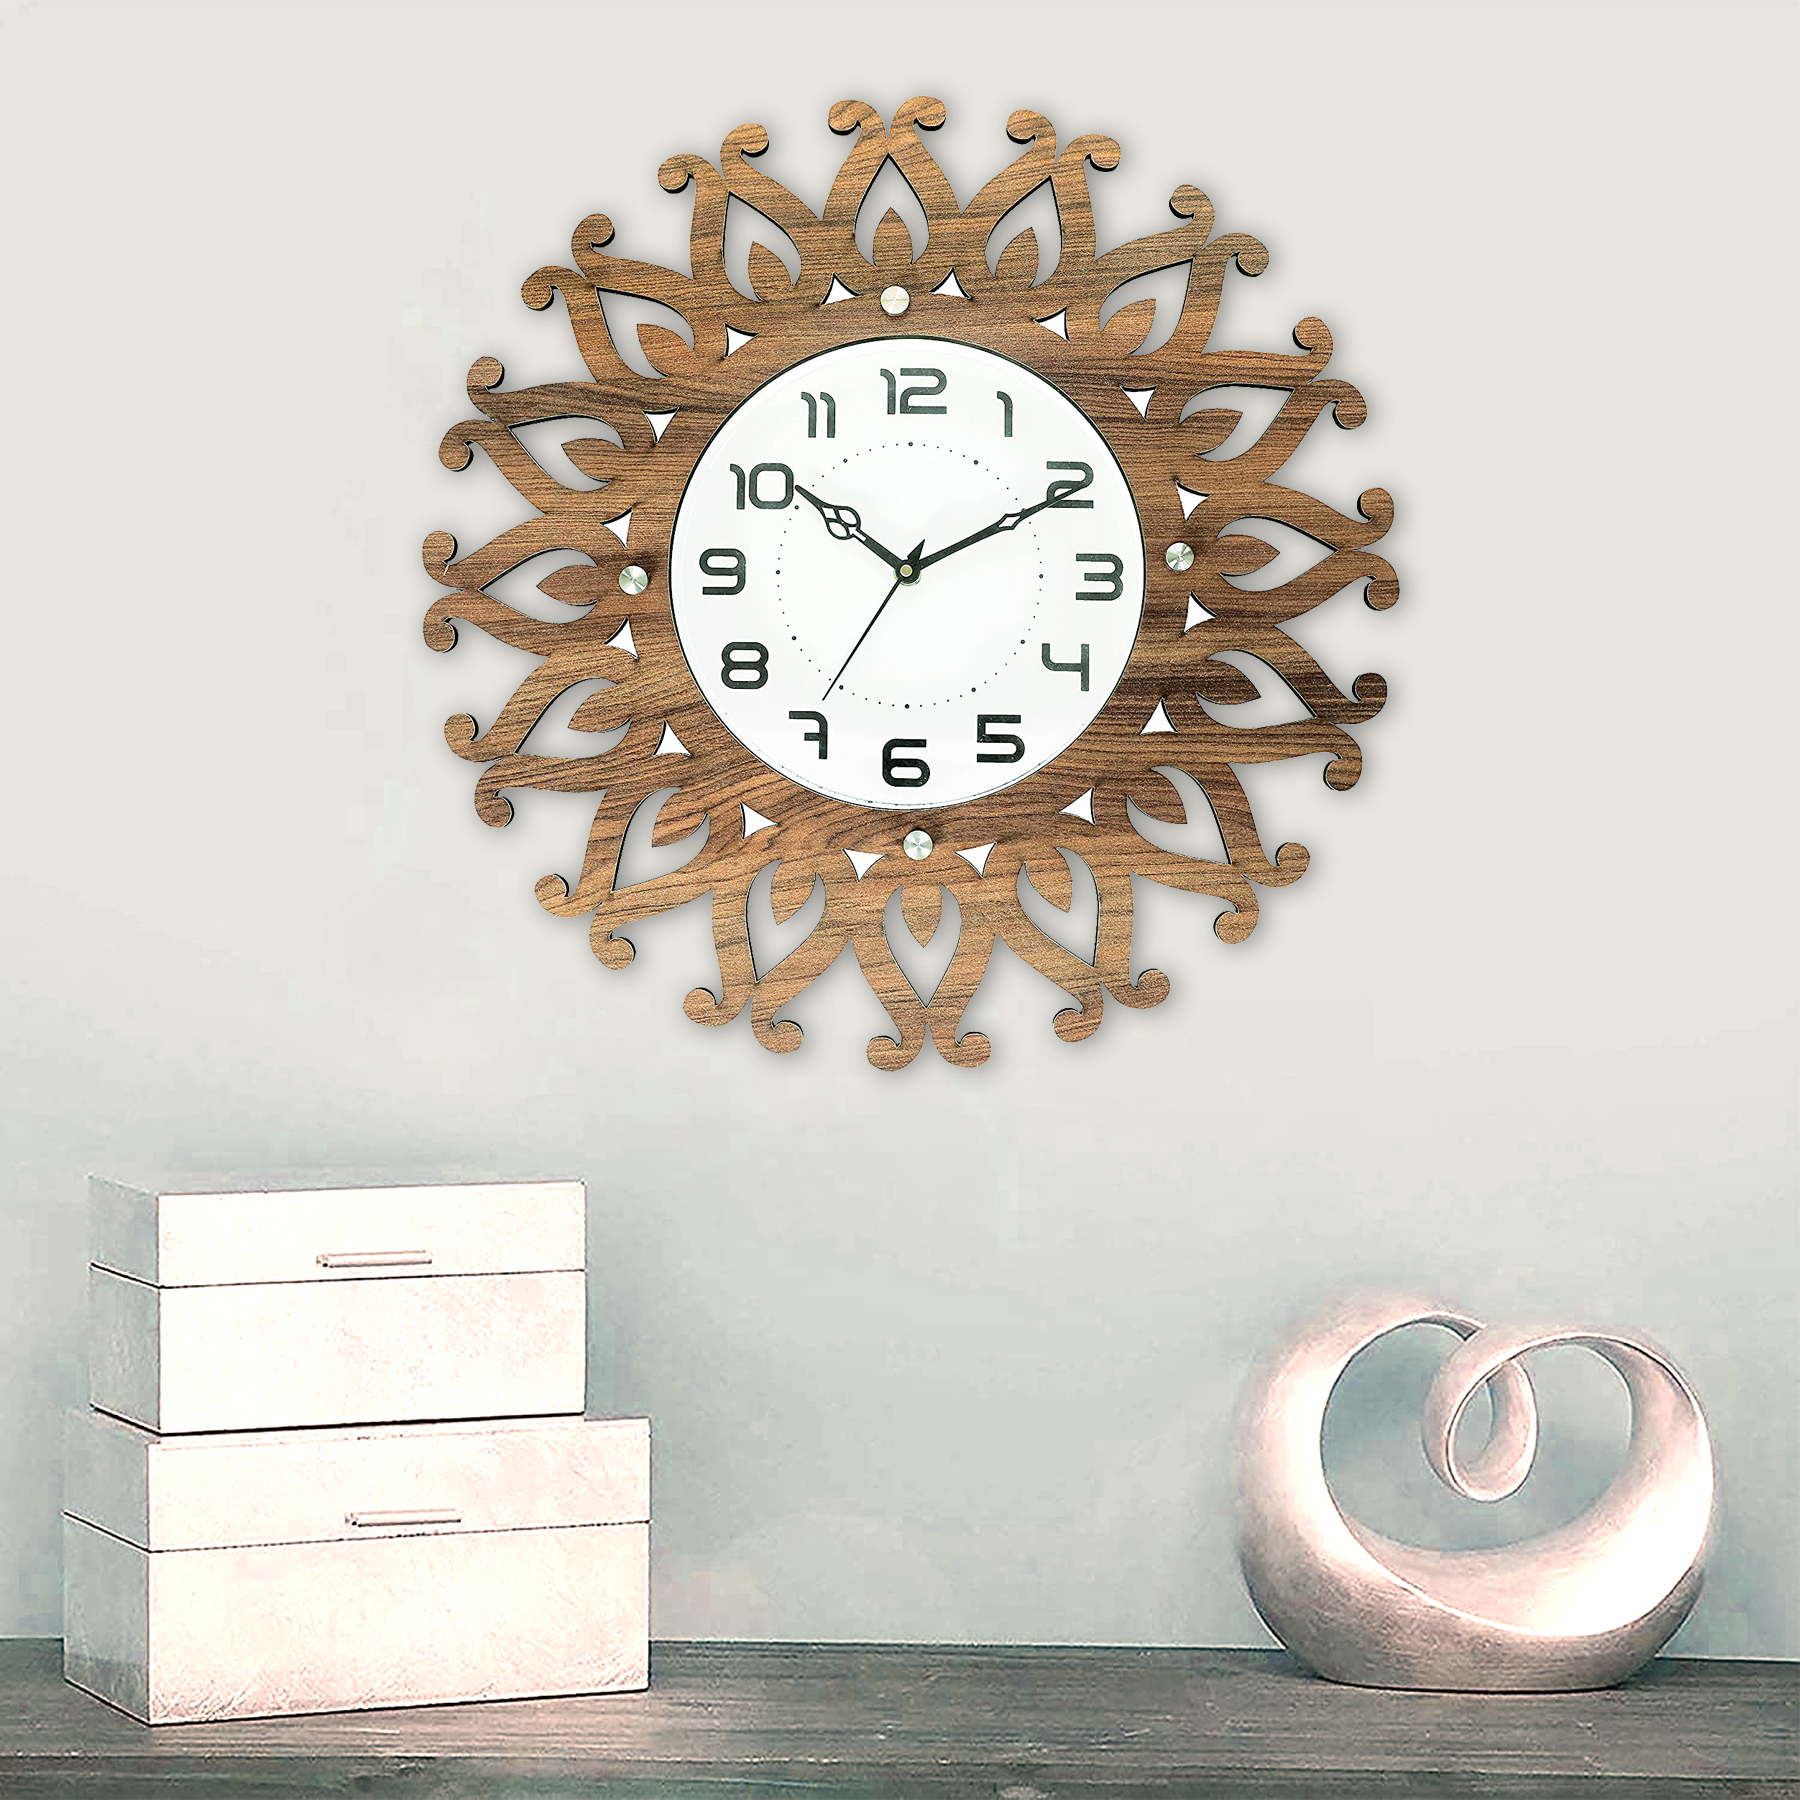 How Wall Clocks Are Made By A Clock Manufacturing Company?